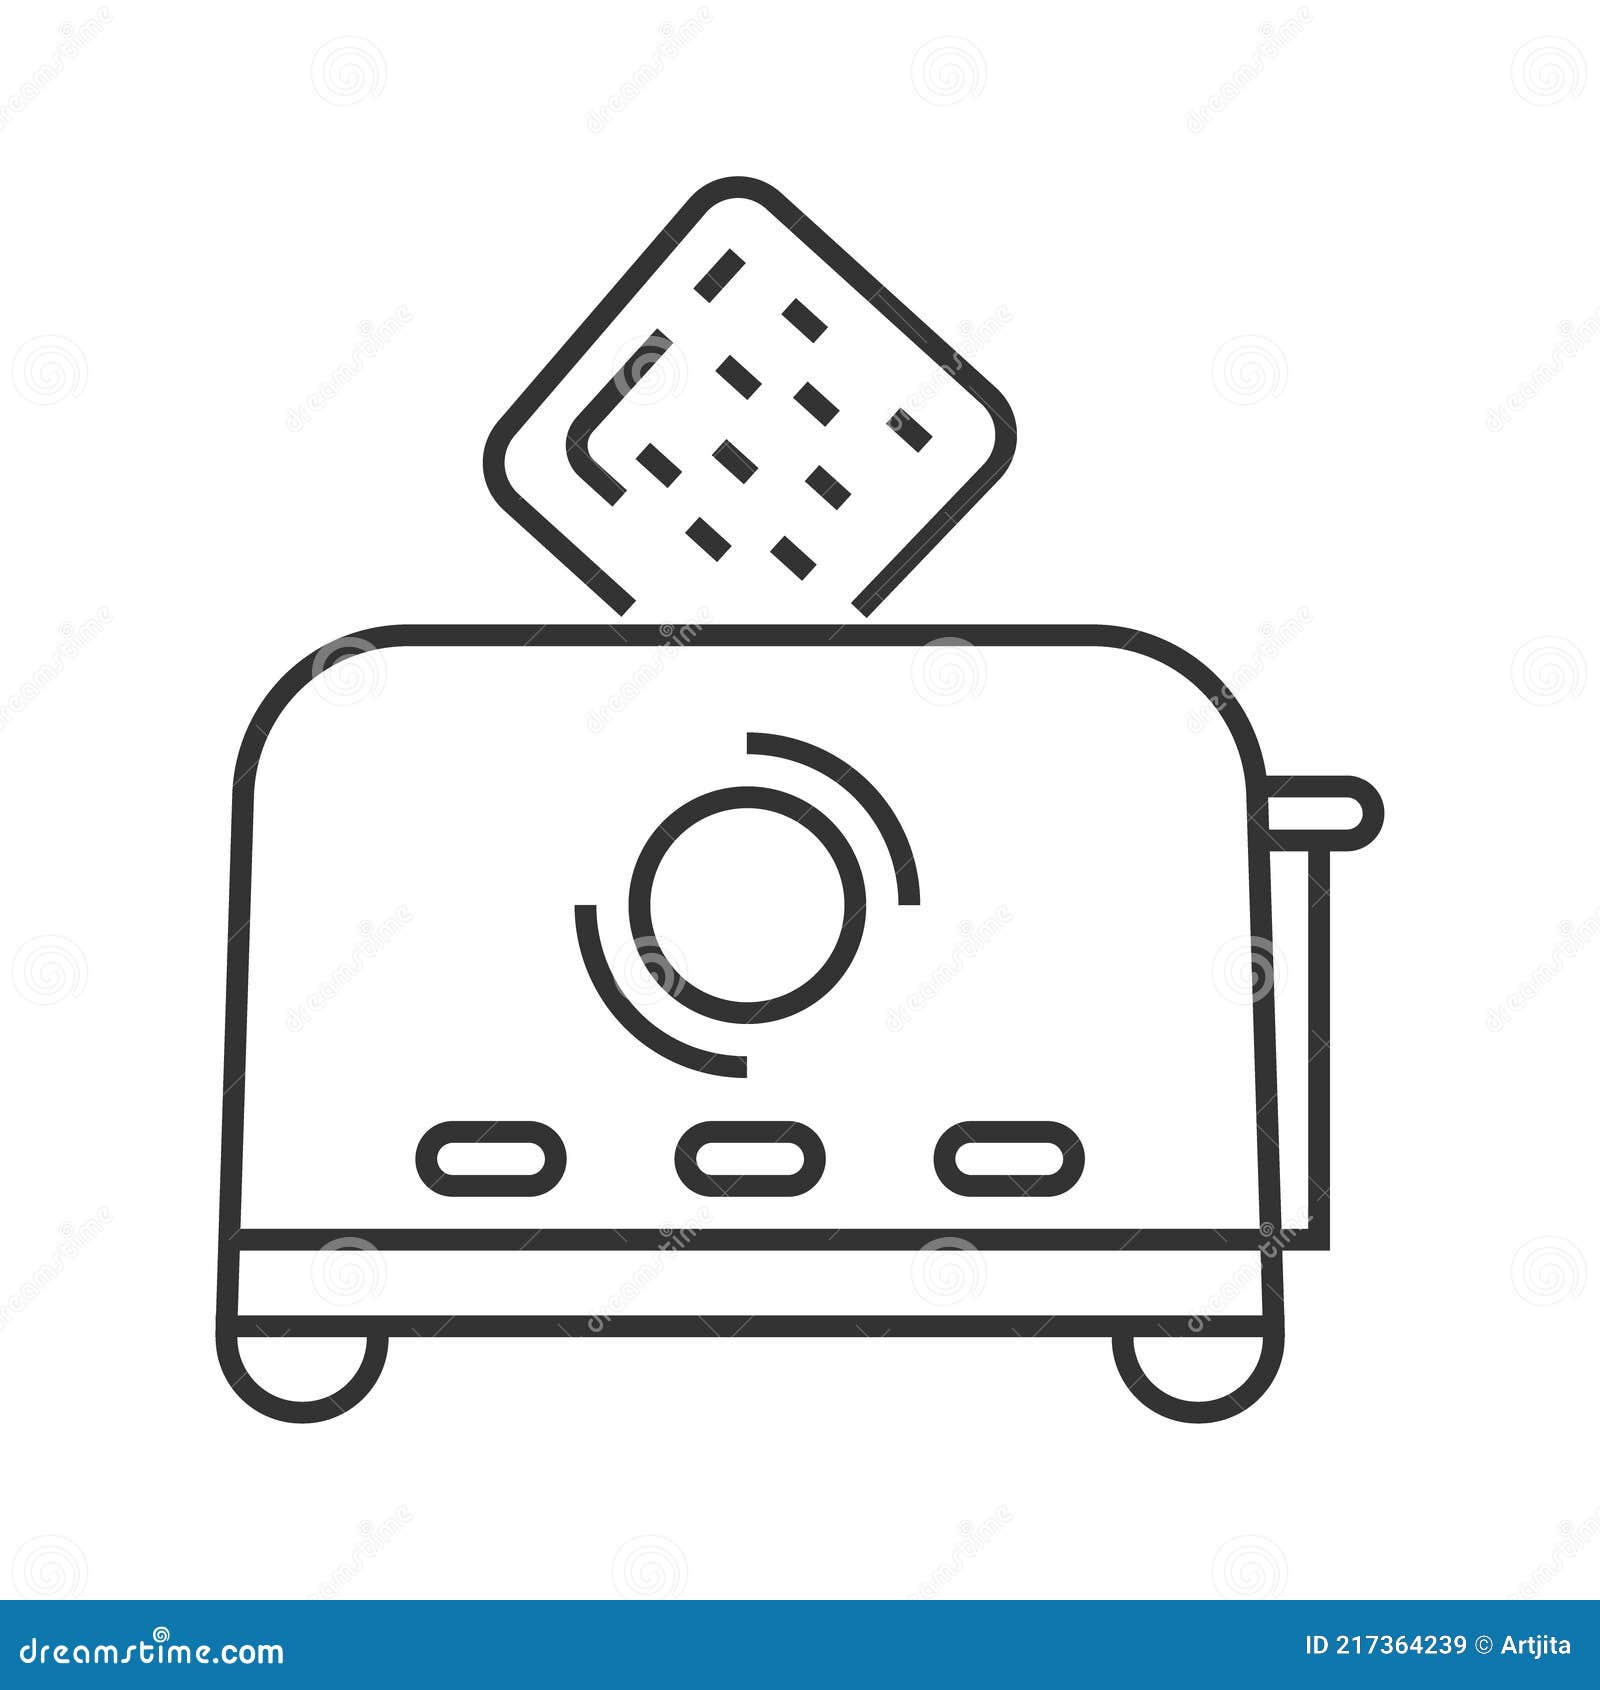 https://thumbs.dreamstime.com/z/toaster-pixel-perfect-icon-vector-kitchen-small-appliances-line-sign-household-tools-symbol-app-web-cooking-equipment-bread-217364239.jpg